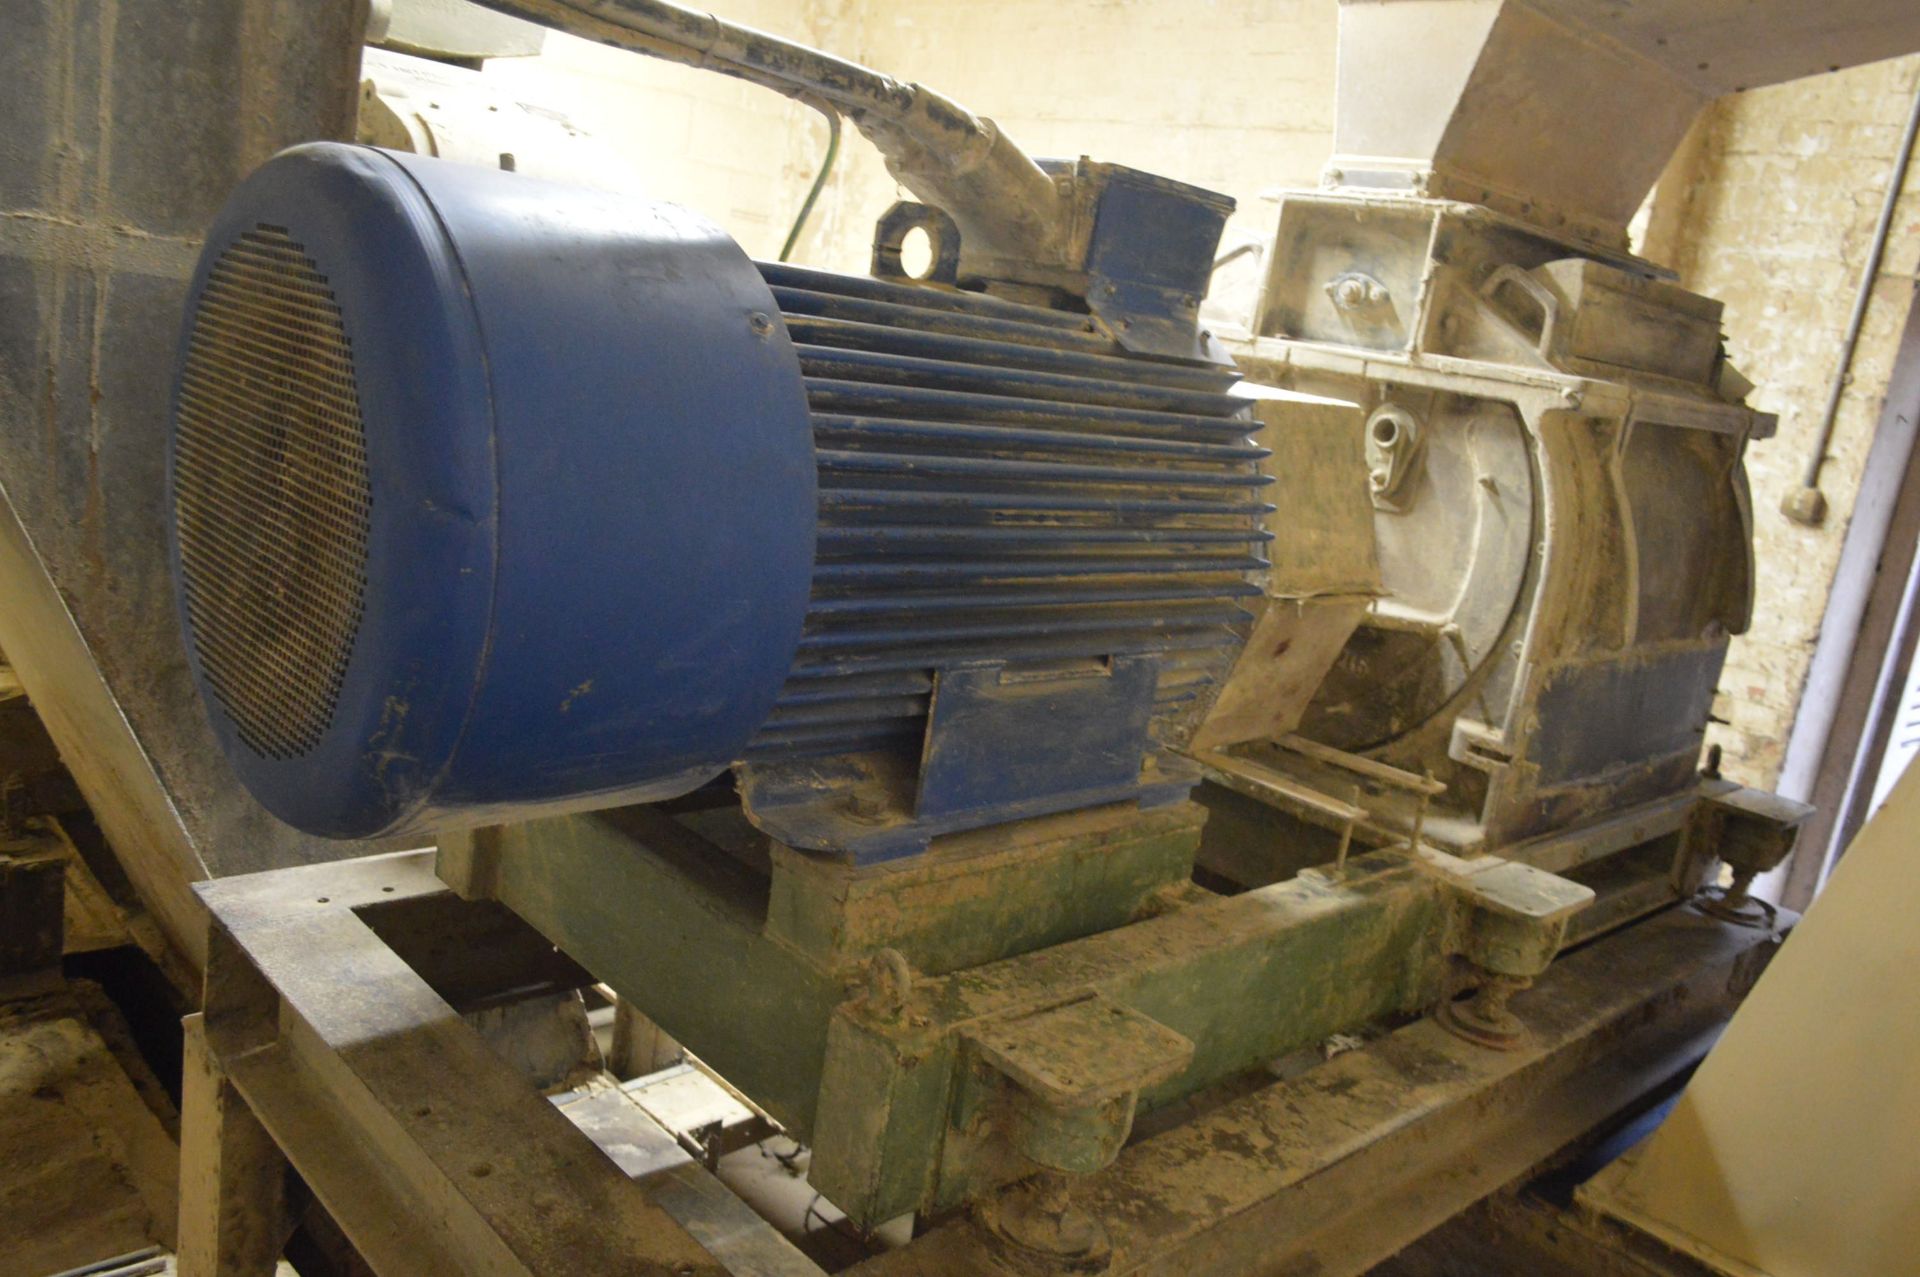 Christy & Norris X26/2 HAMMER MILL GRINDER, with Brook CP 150kW electric motor, 2965rpm, Tietjen - Image 3 of 8